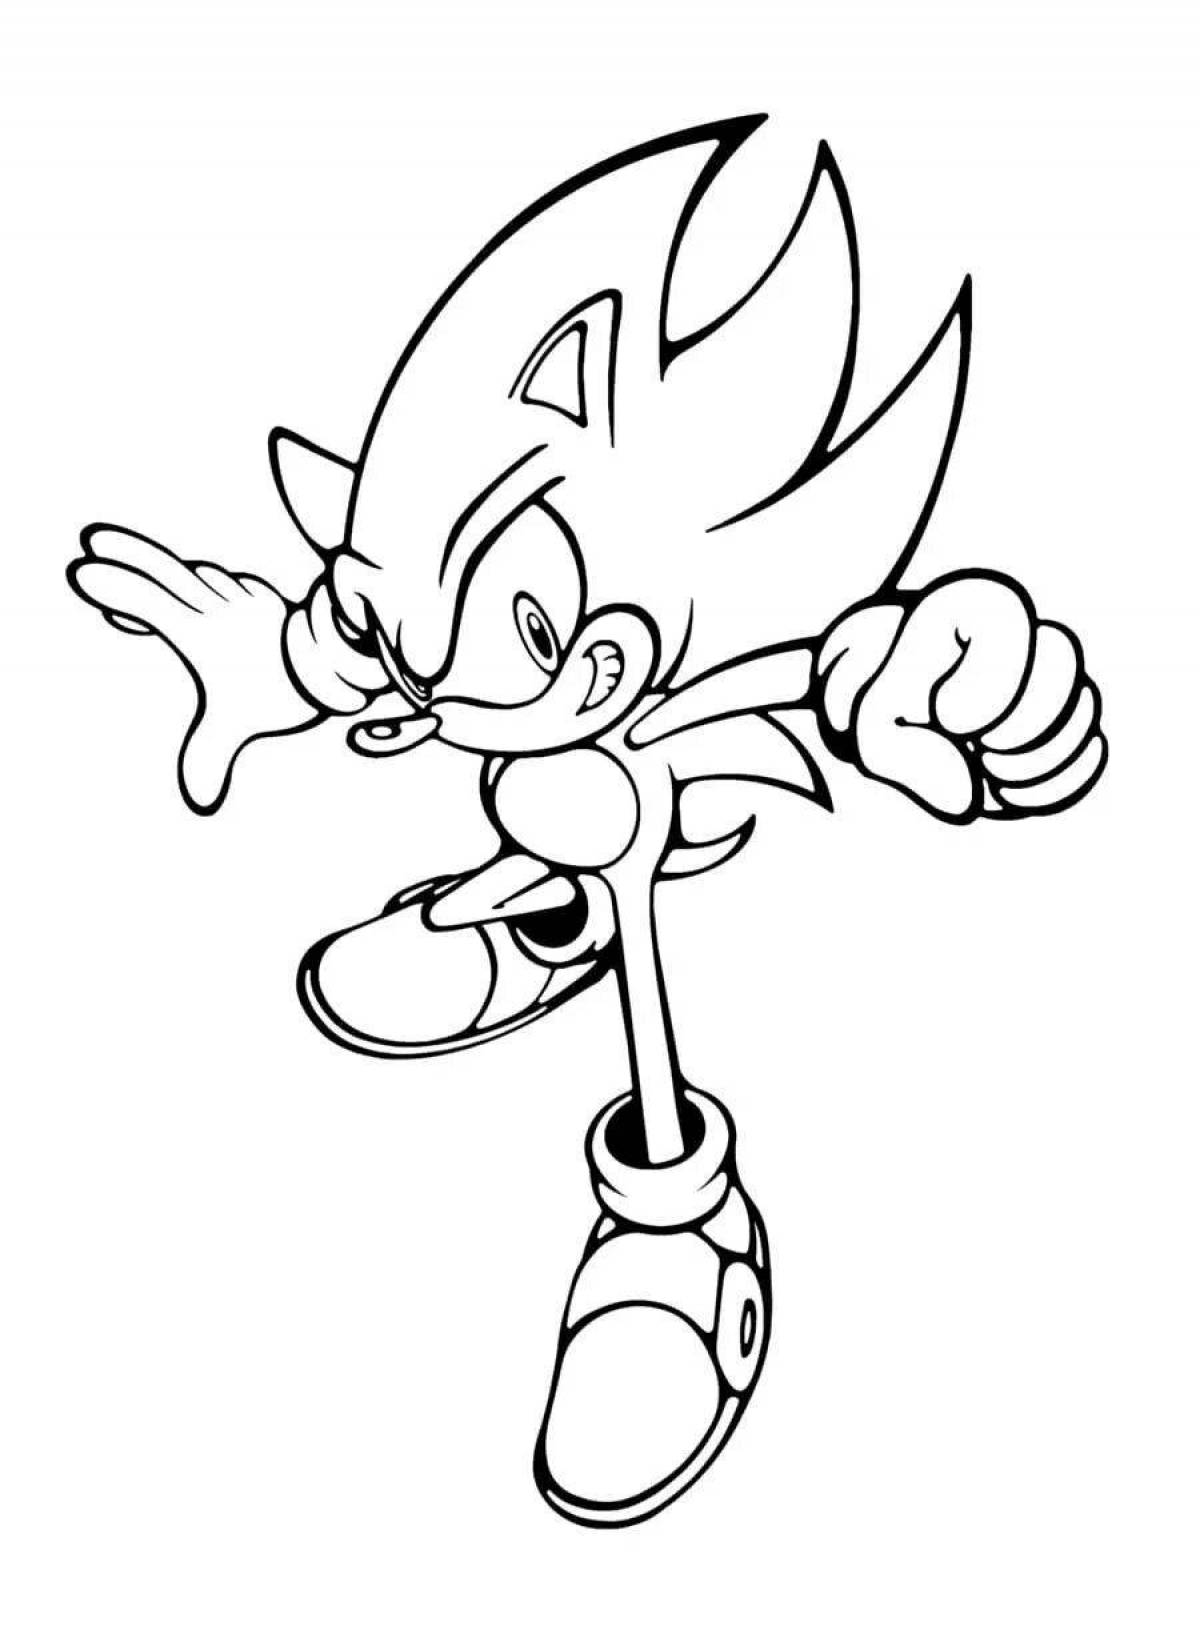 Sonic classic glowing coloring book